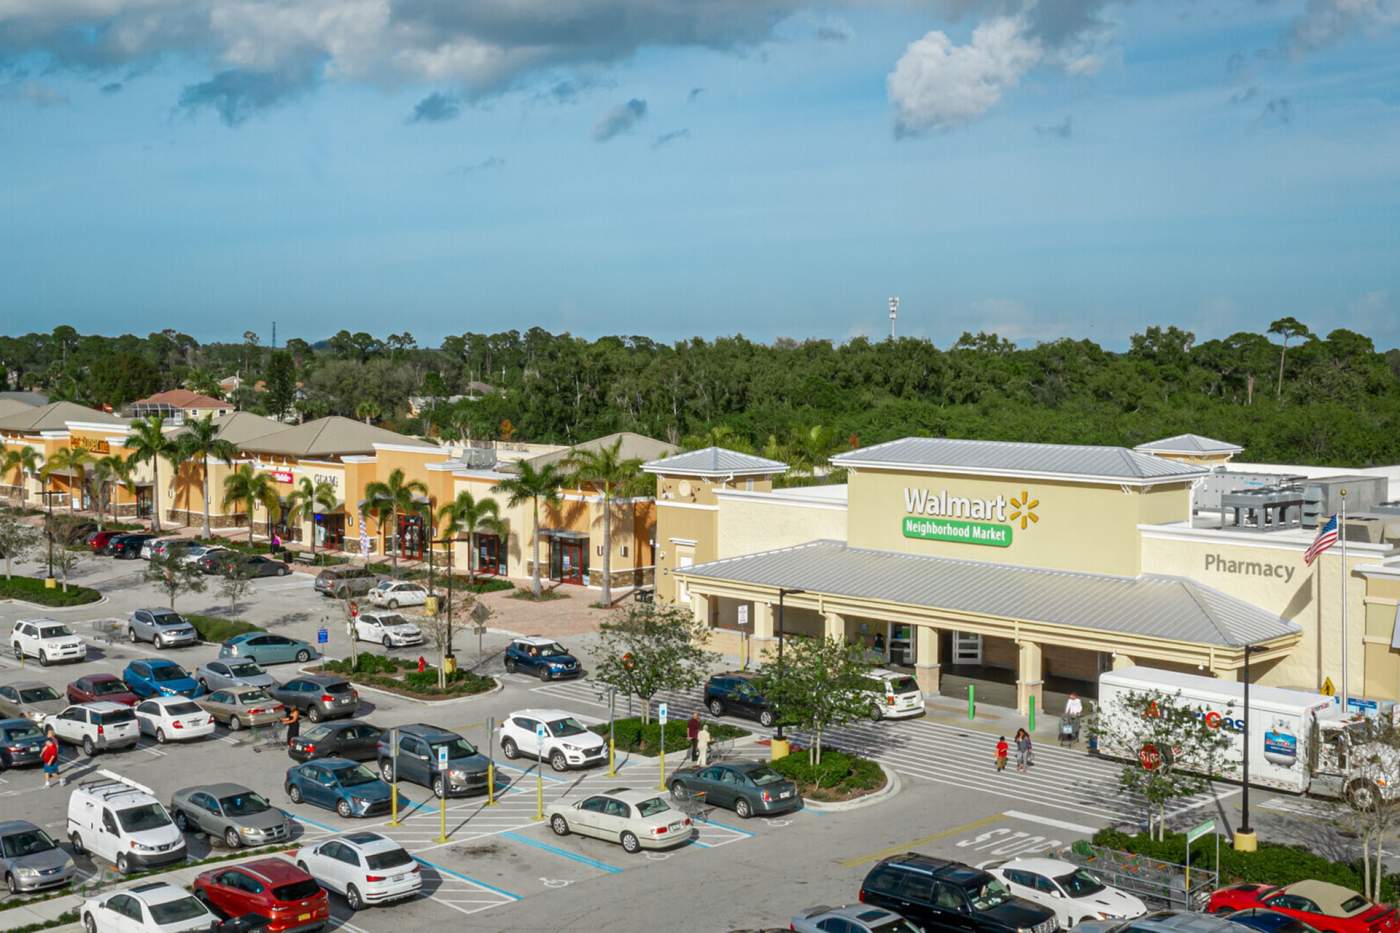 Sympatico Plaza 3045  SW  Port  St  Lucie  Blvd  Port  Saint  Lucie  FL  New  Retail  Spaces with Beautiful Landscaping aerial